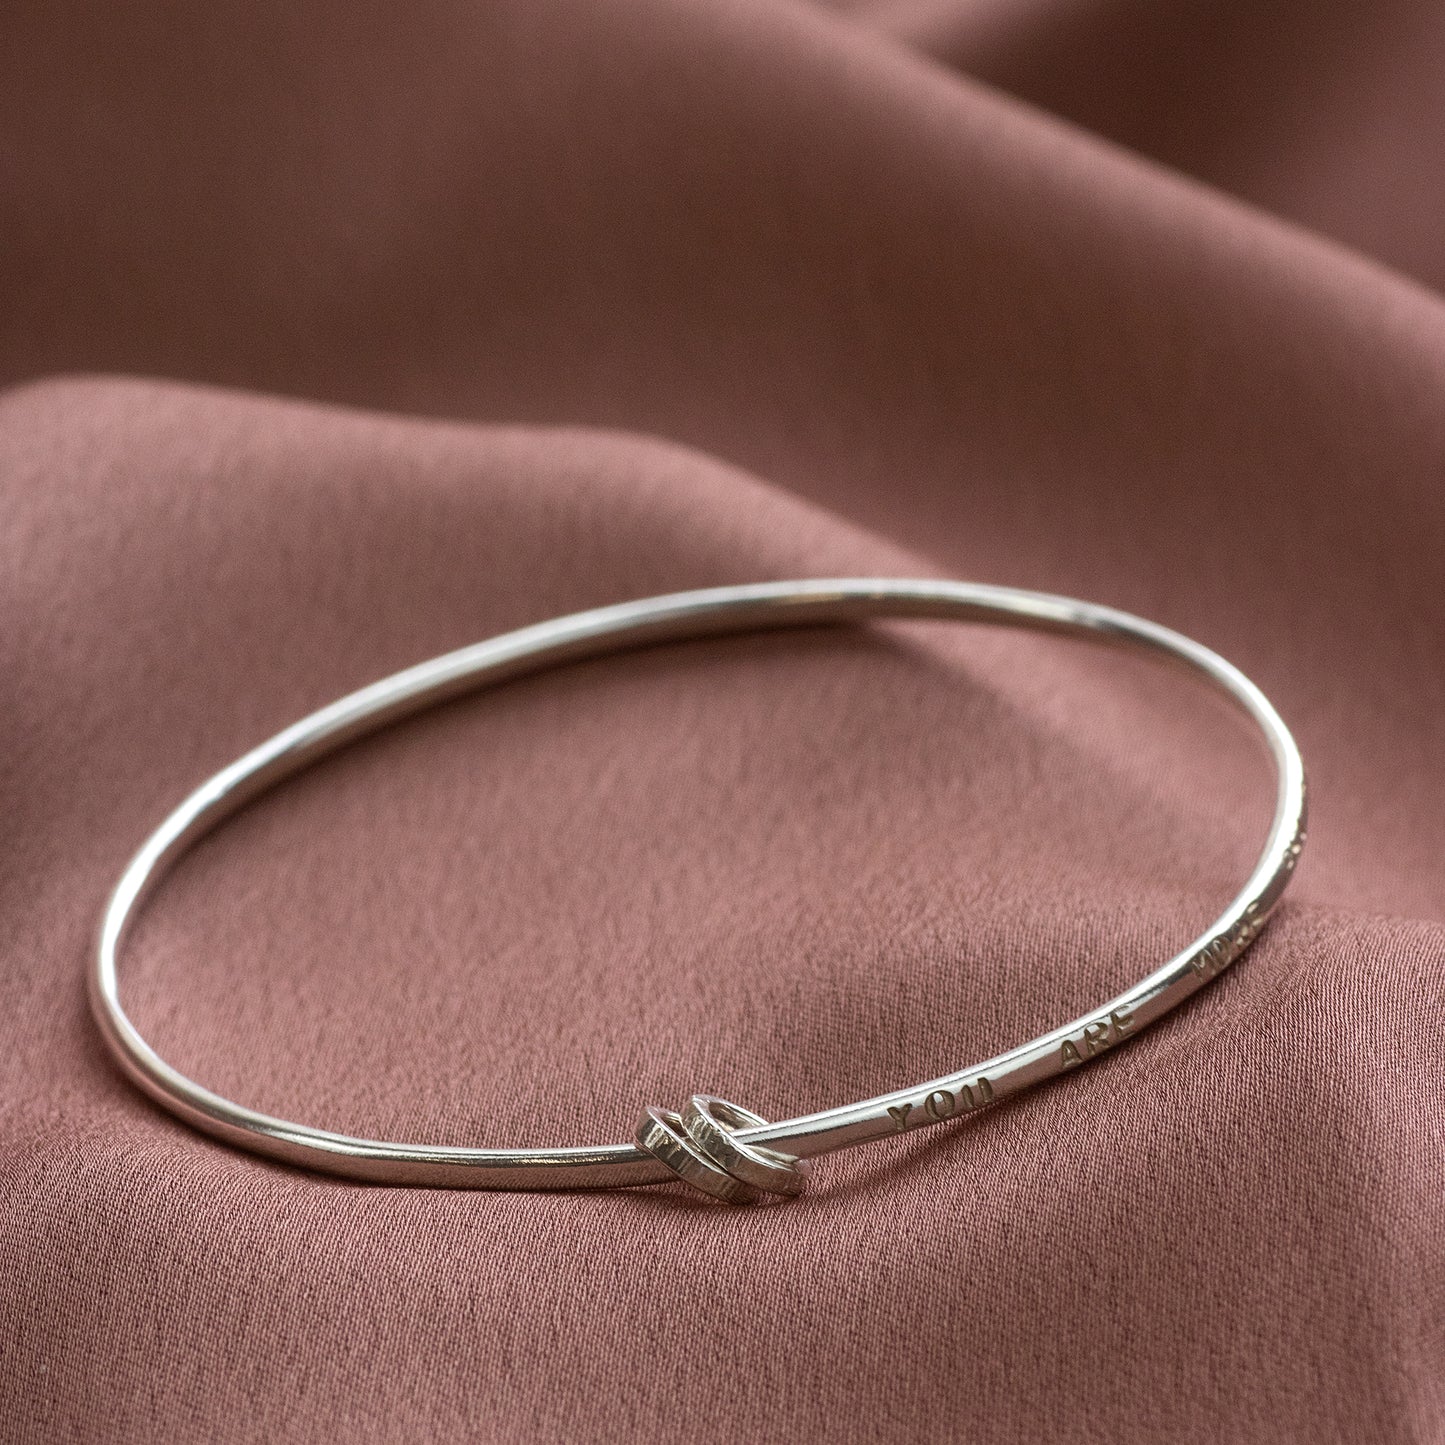 Wedding Day Gift for Sister - Personalised Silver Bangle - 2 Links for 2 Sisters